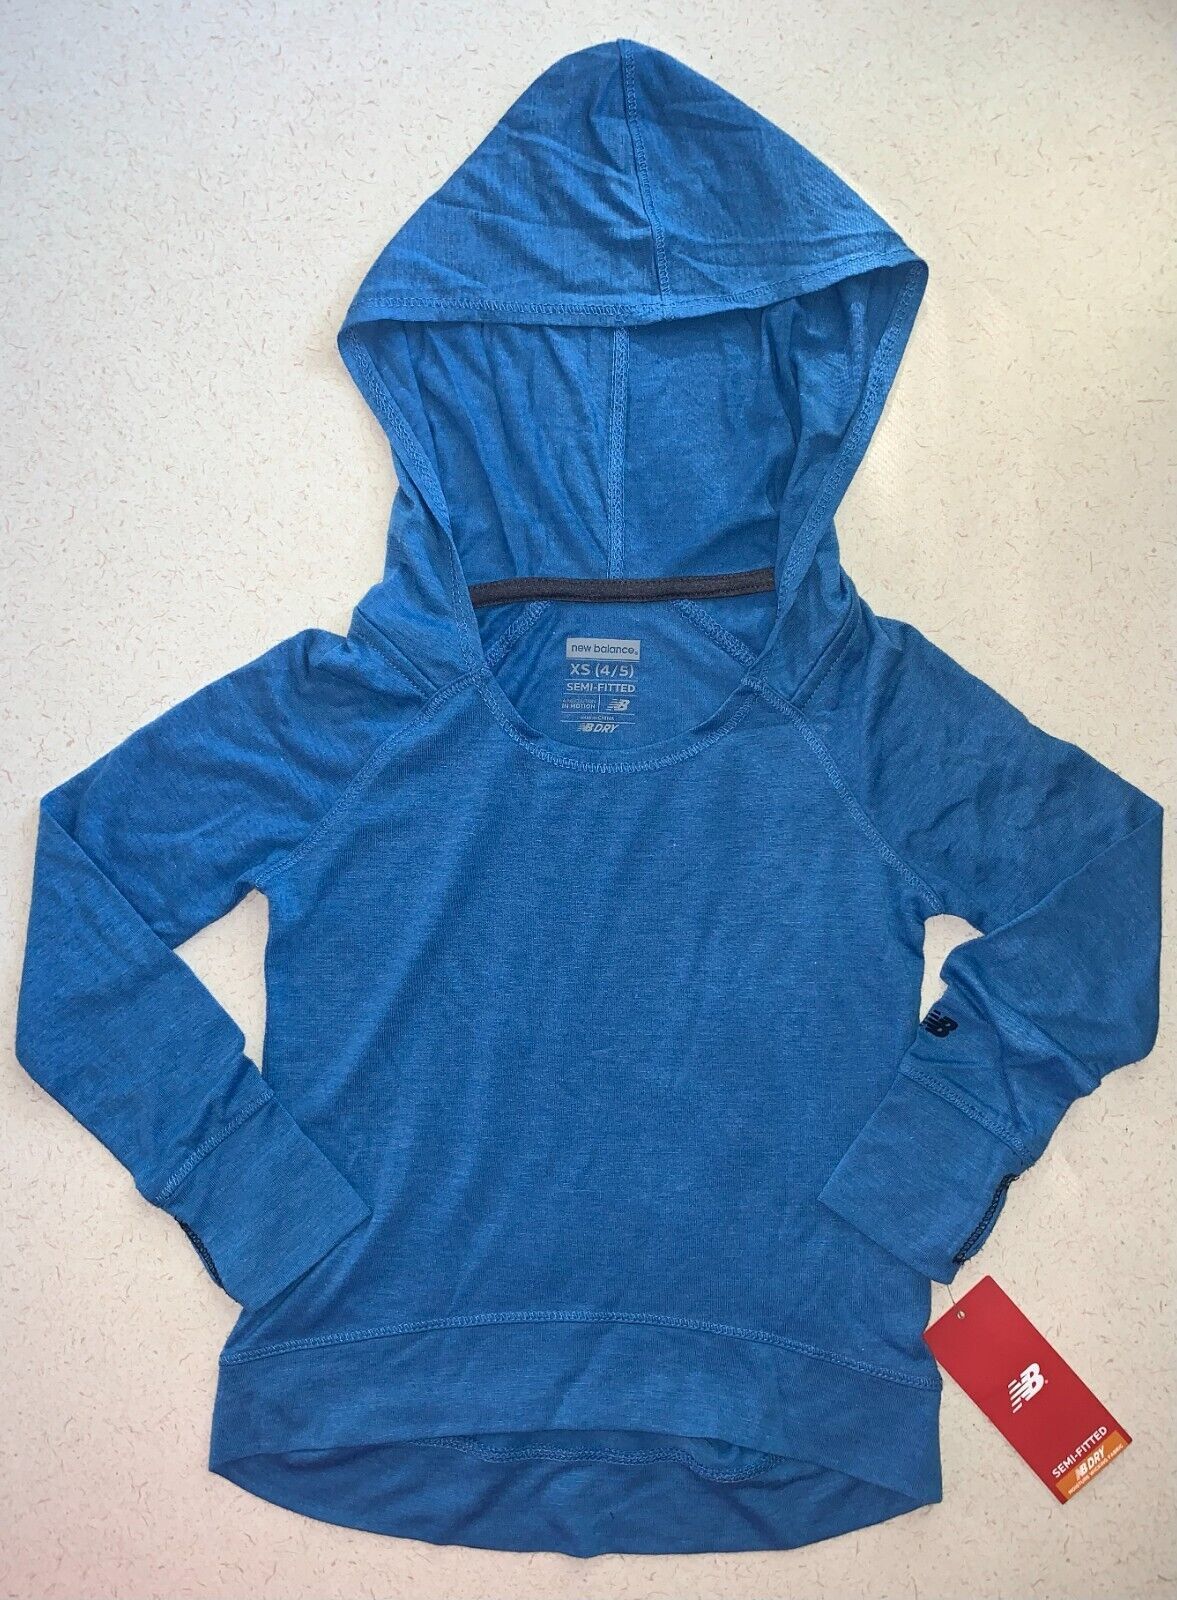 Primary image for NEW Balance Girls Element Hi-Lo Hoodie Light Weight Thumb Holes Blue XS (4/5)